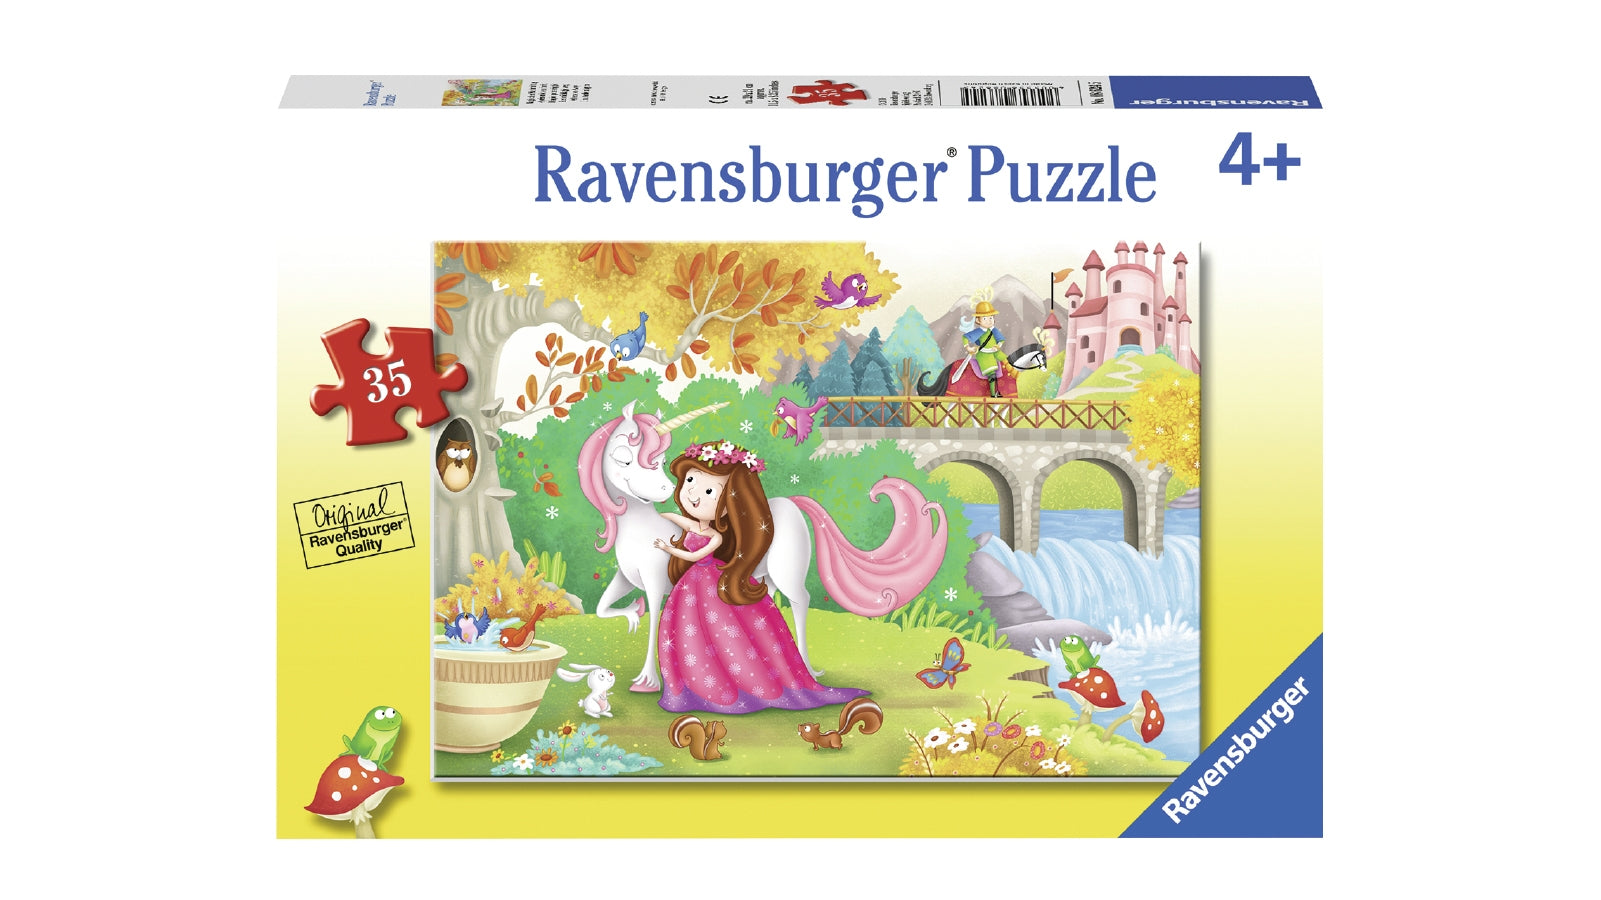 Afternoon Away Puzzle 35pc